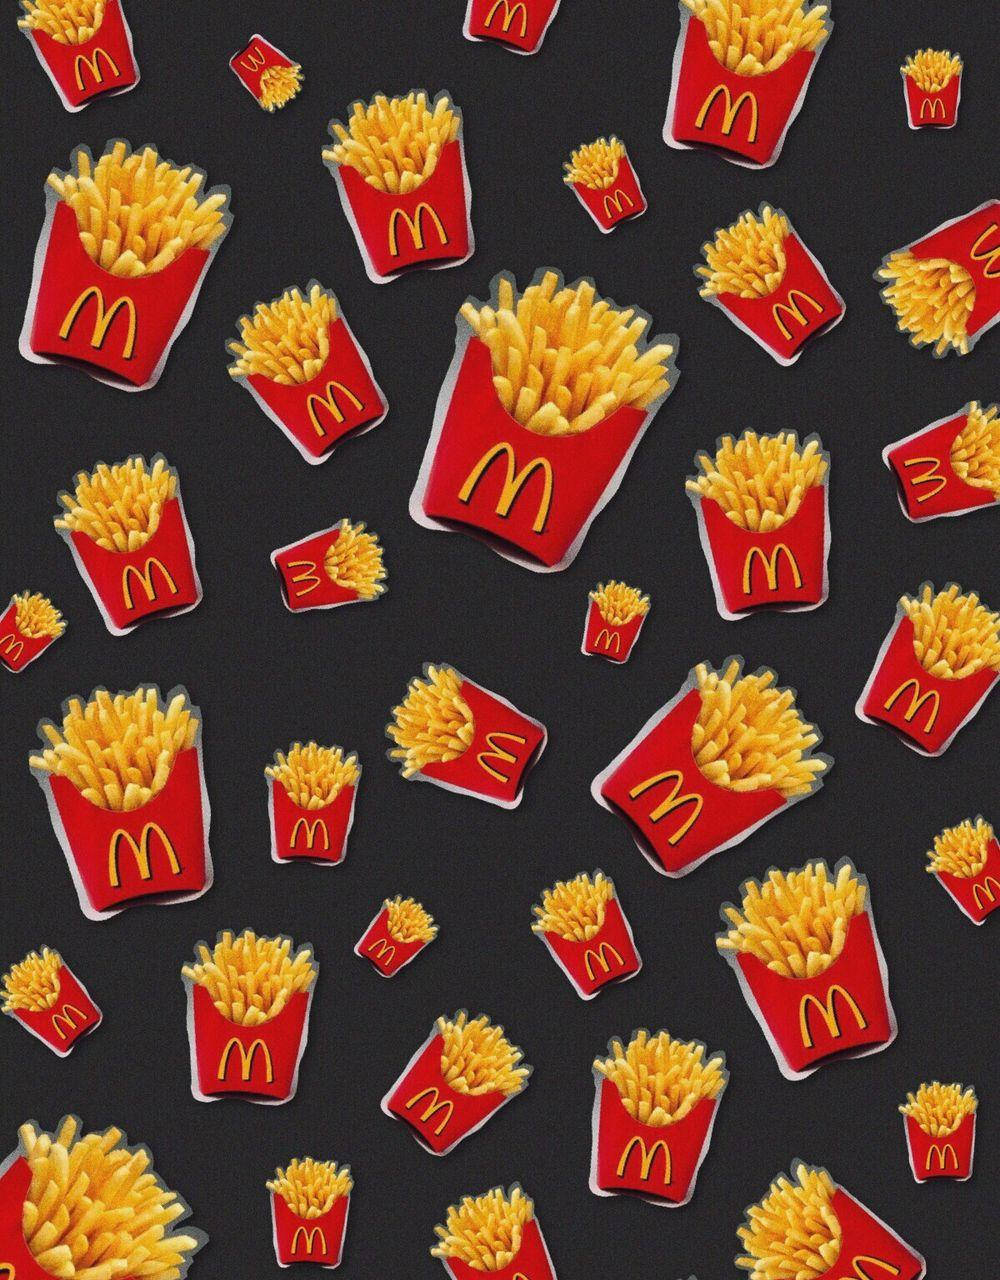 A Mouth-watering Pattern Of Golden-crisp French Fries